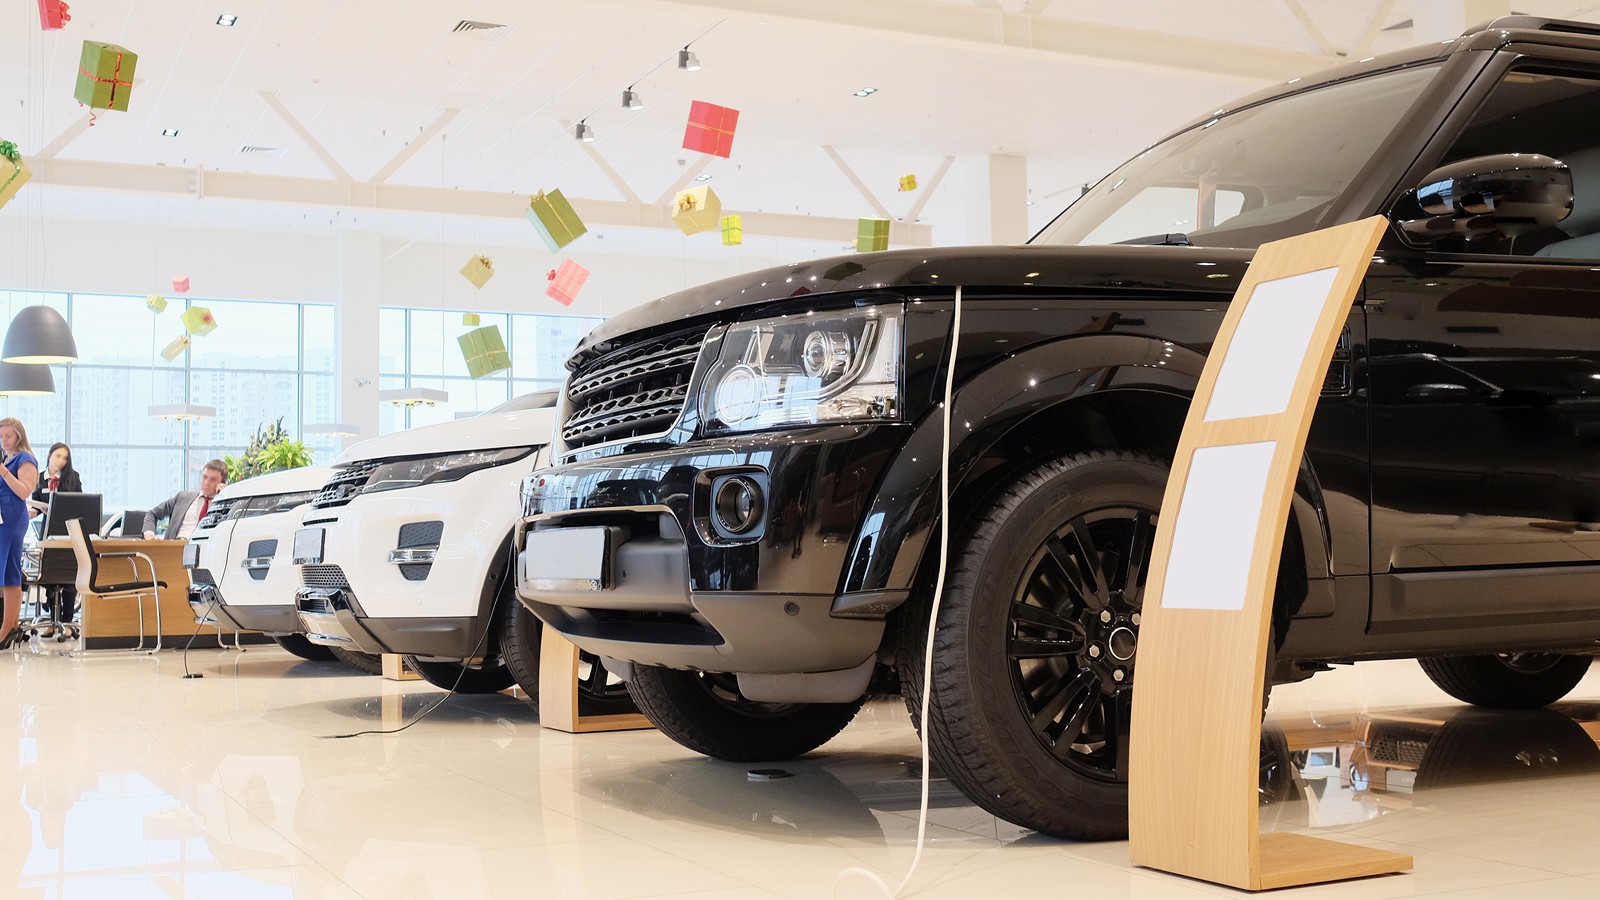 Moscow, Russia, December, 3, 2014: cars in a showroom of a car trading center in Moscow, Russia